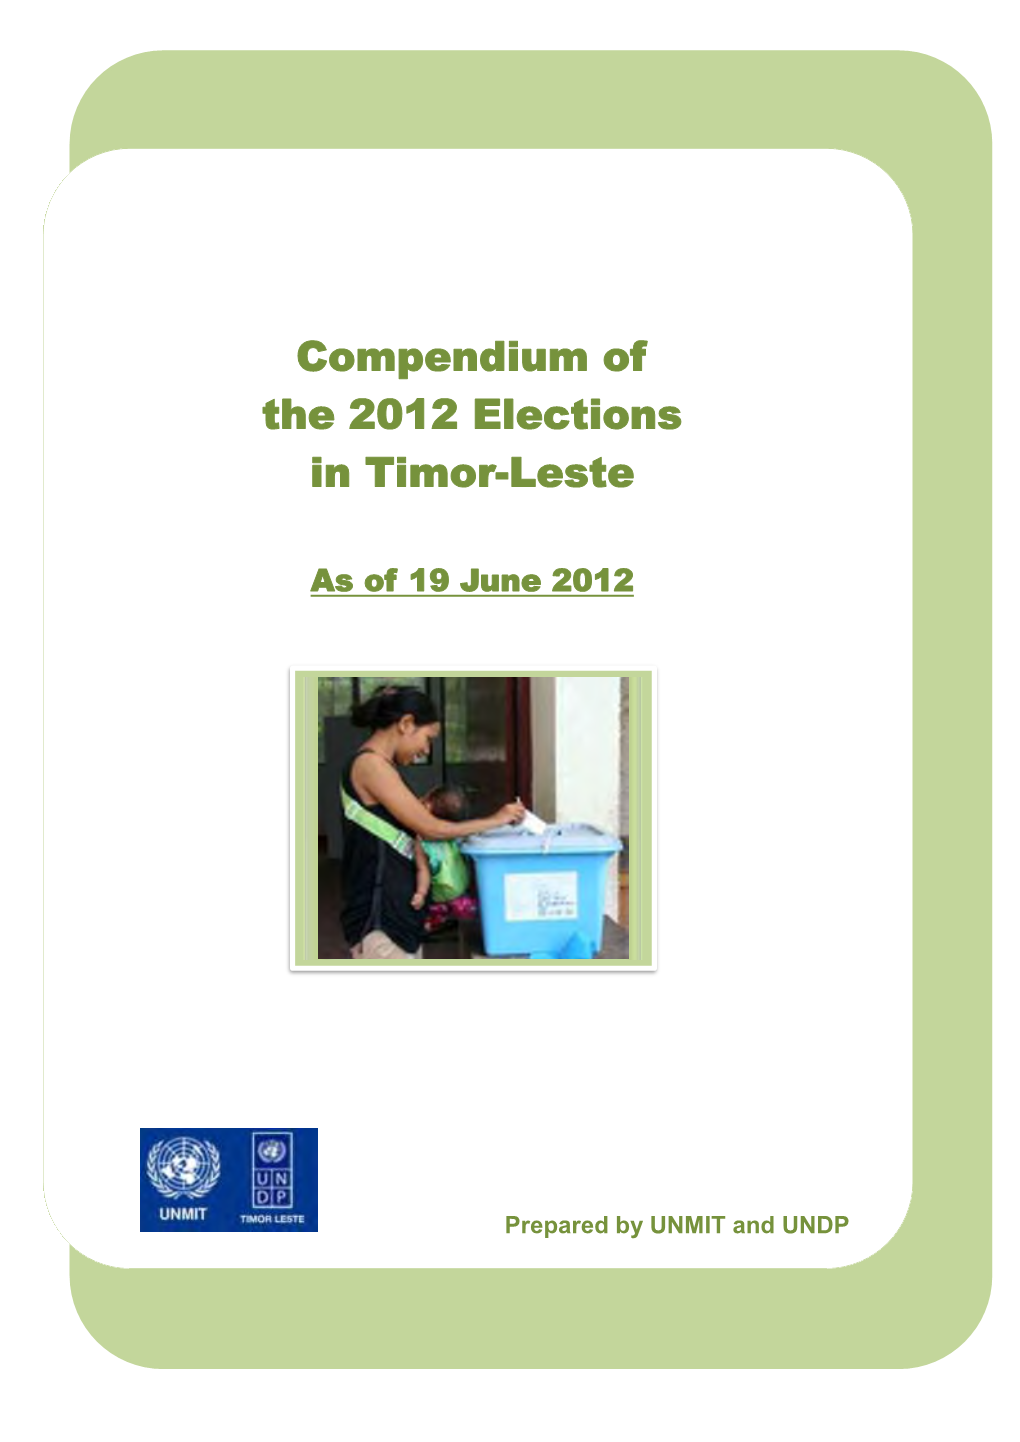 Compendium of the 2012 Elections in Timor-Leste